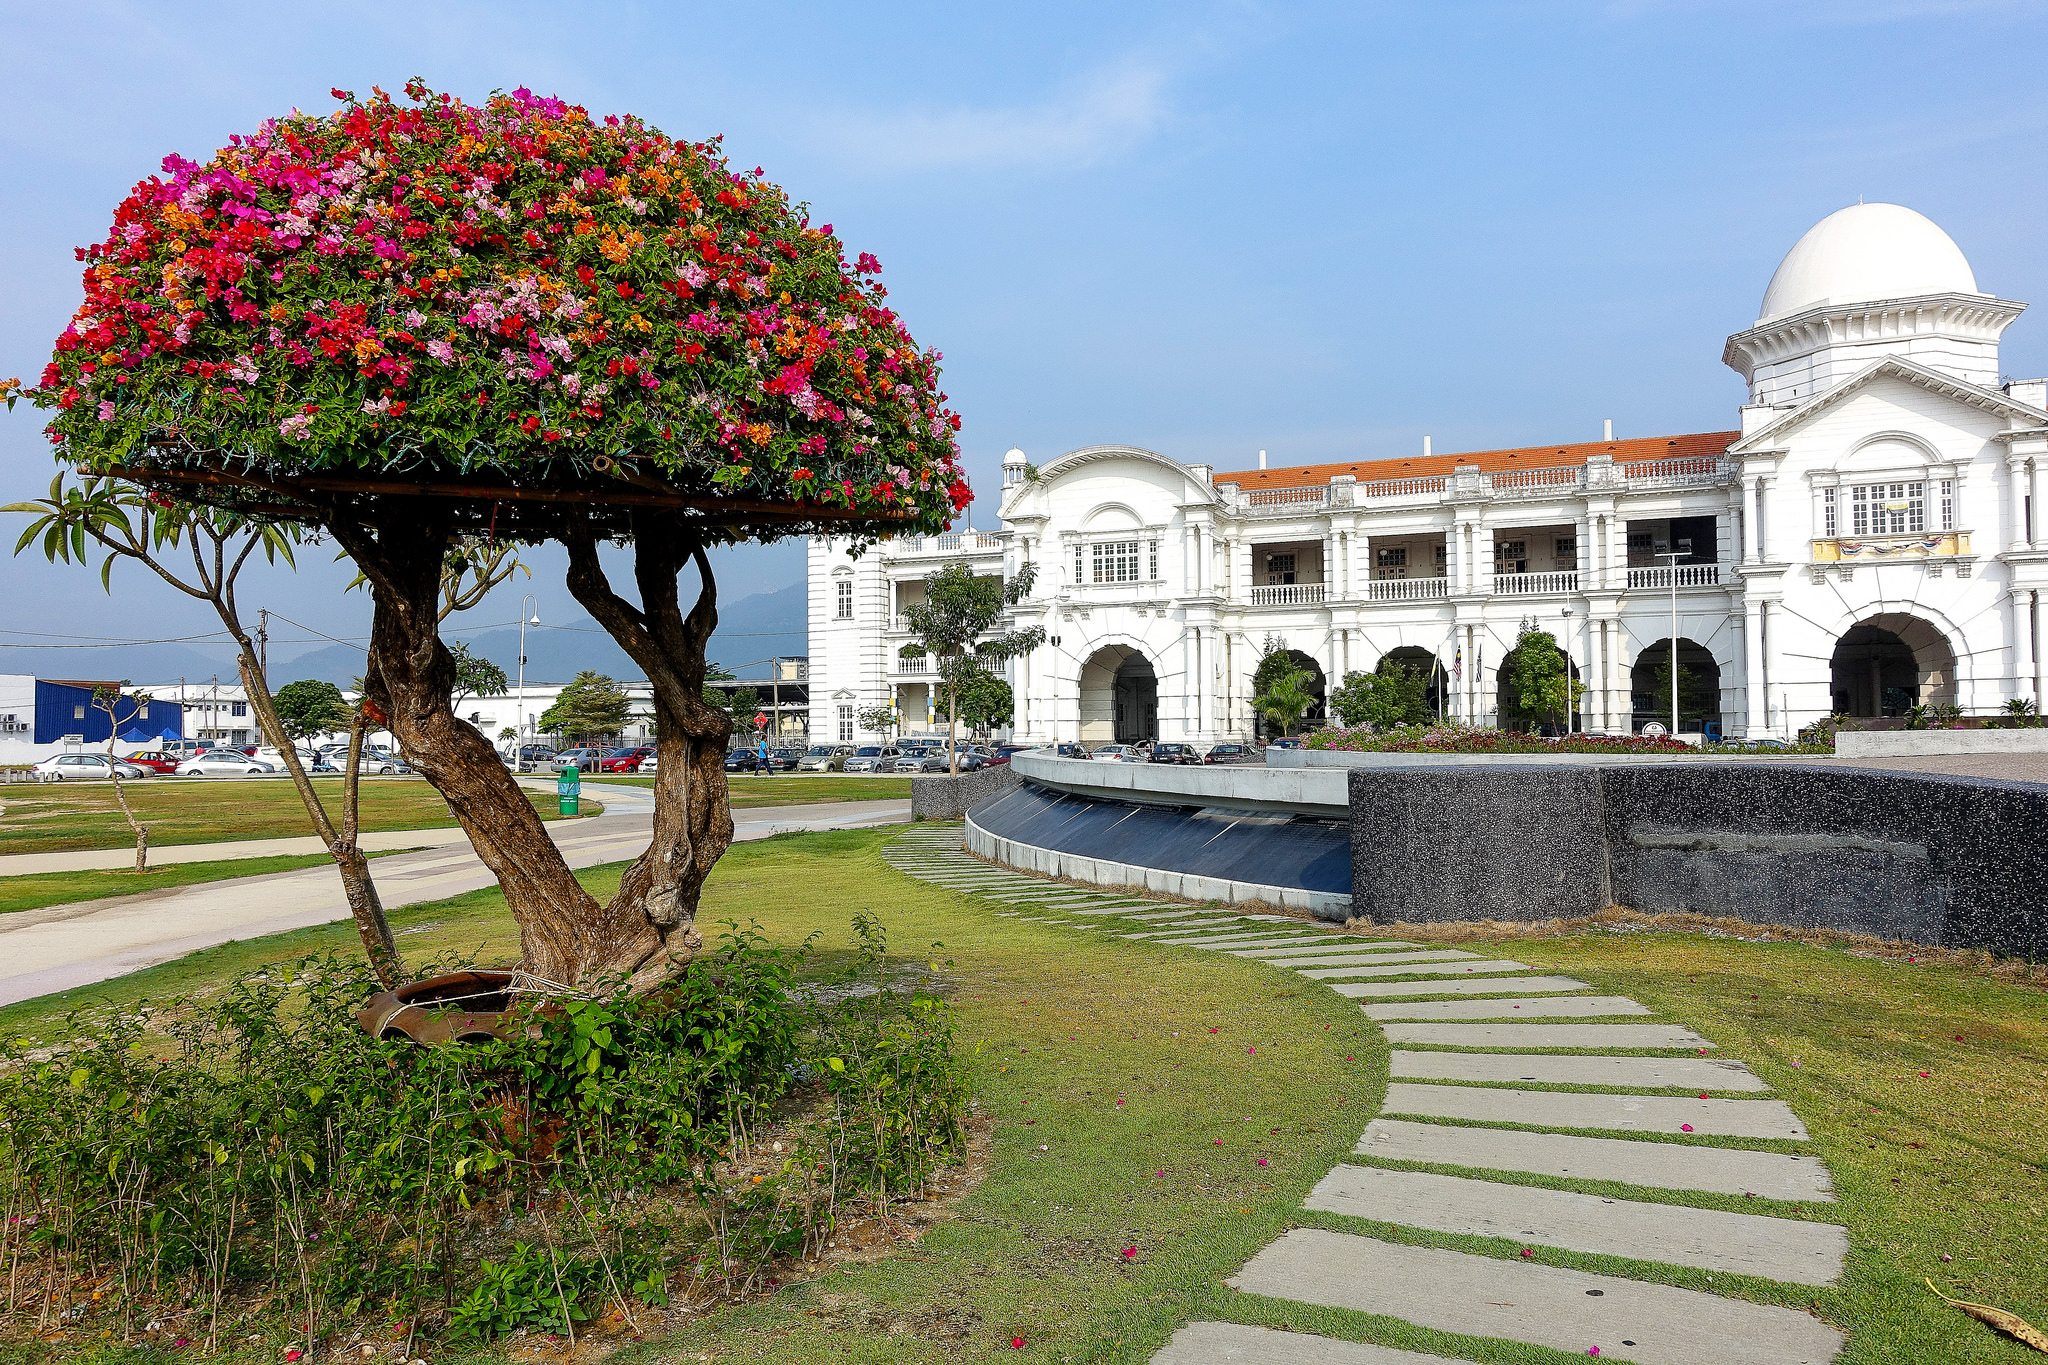 One Day Trip in Ipoh: 9 Awesome Things to See and Do